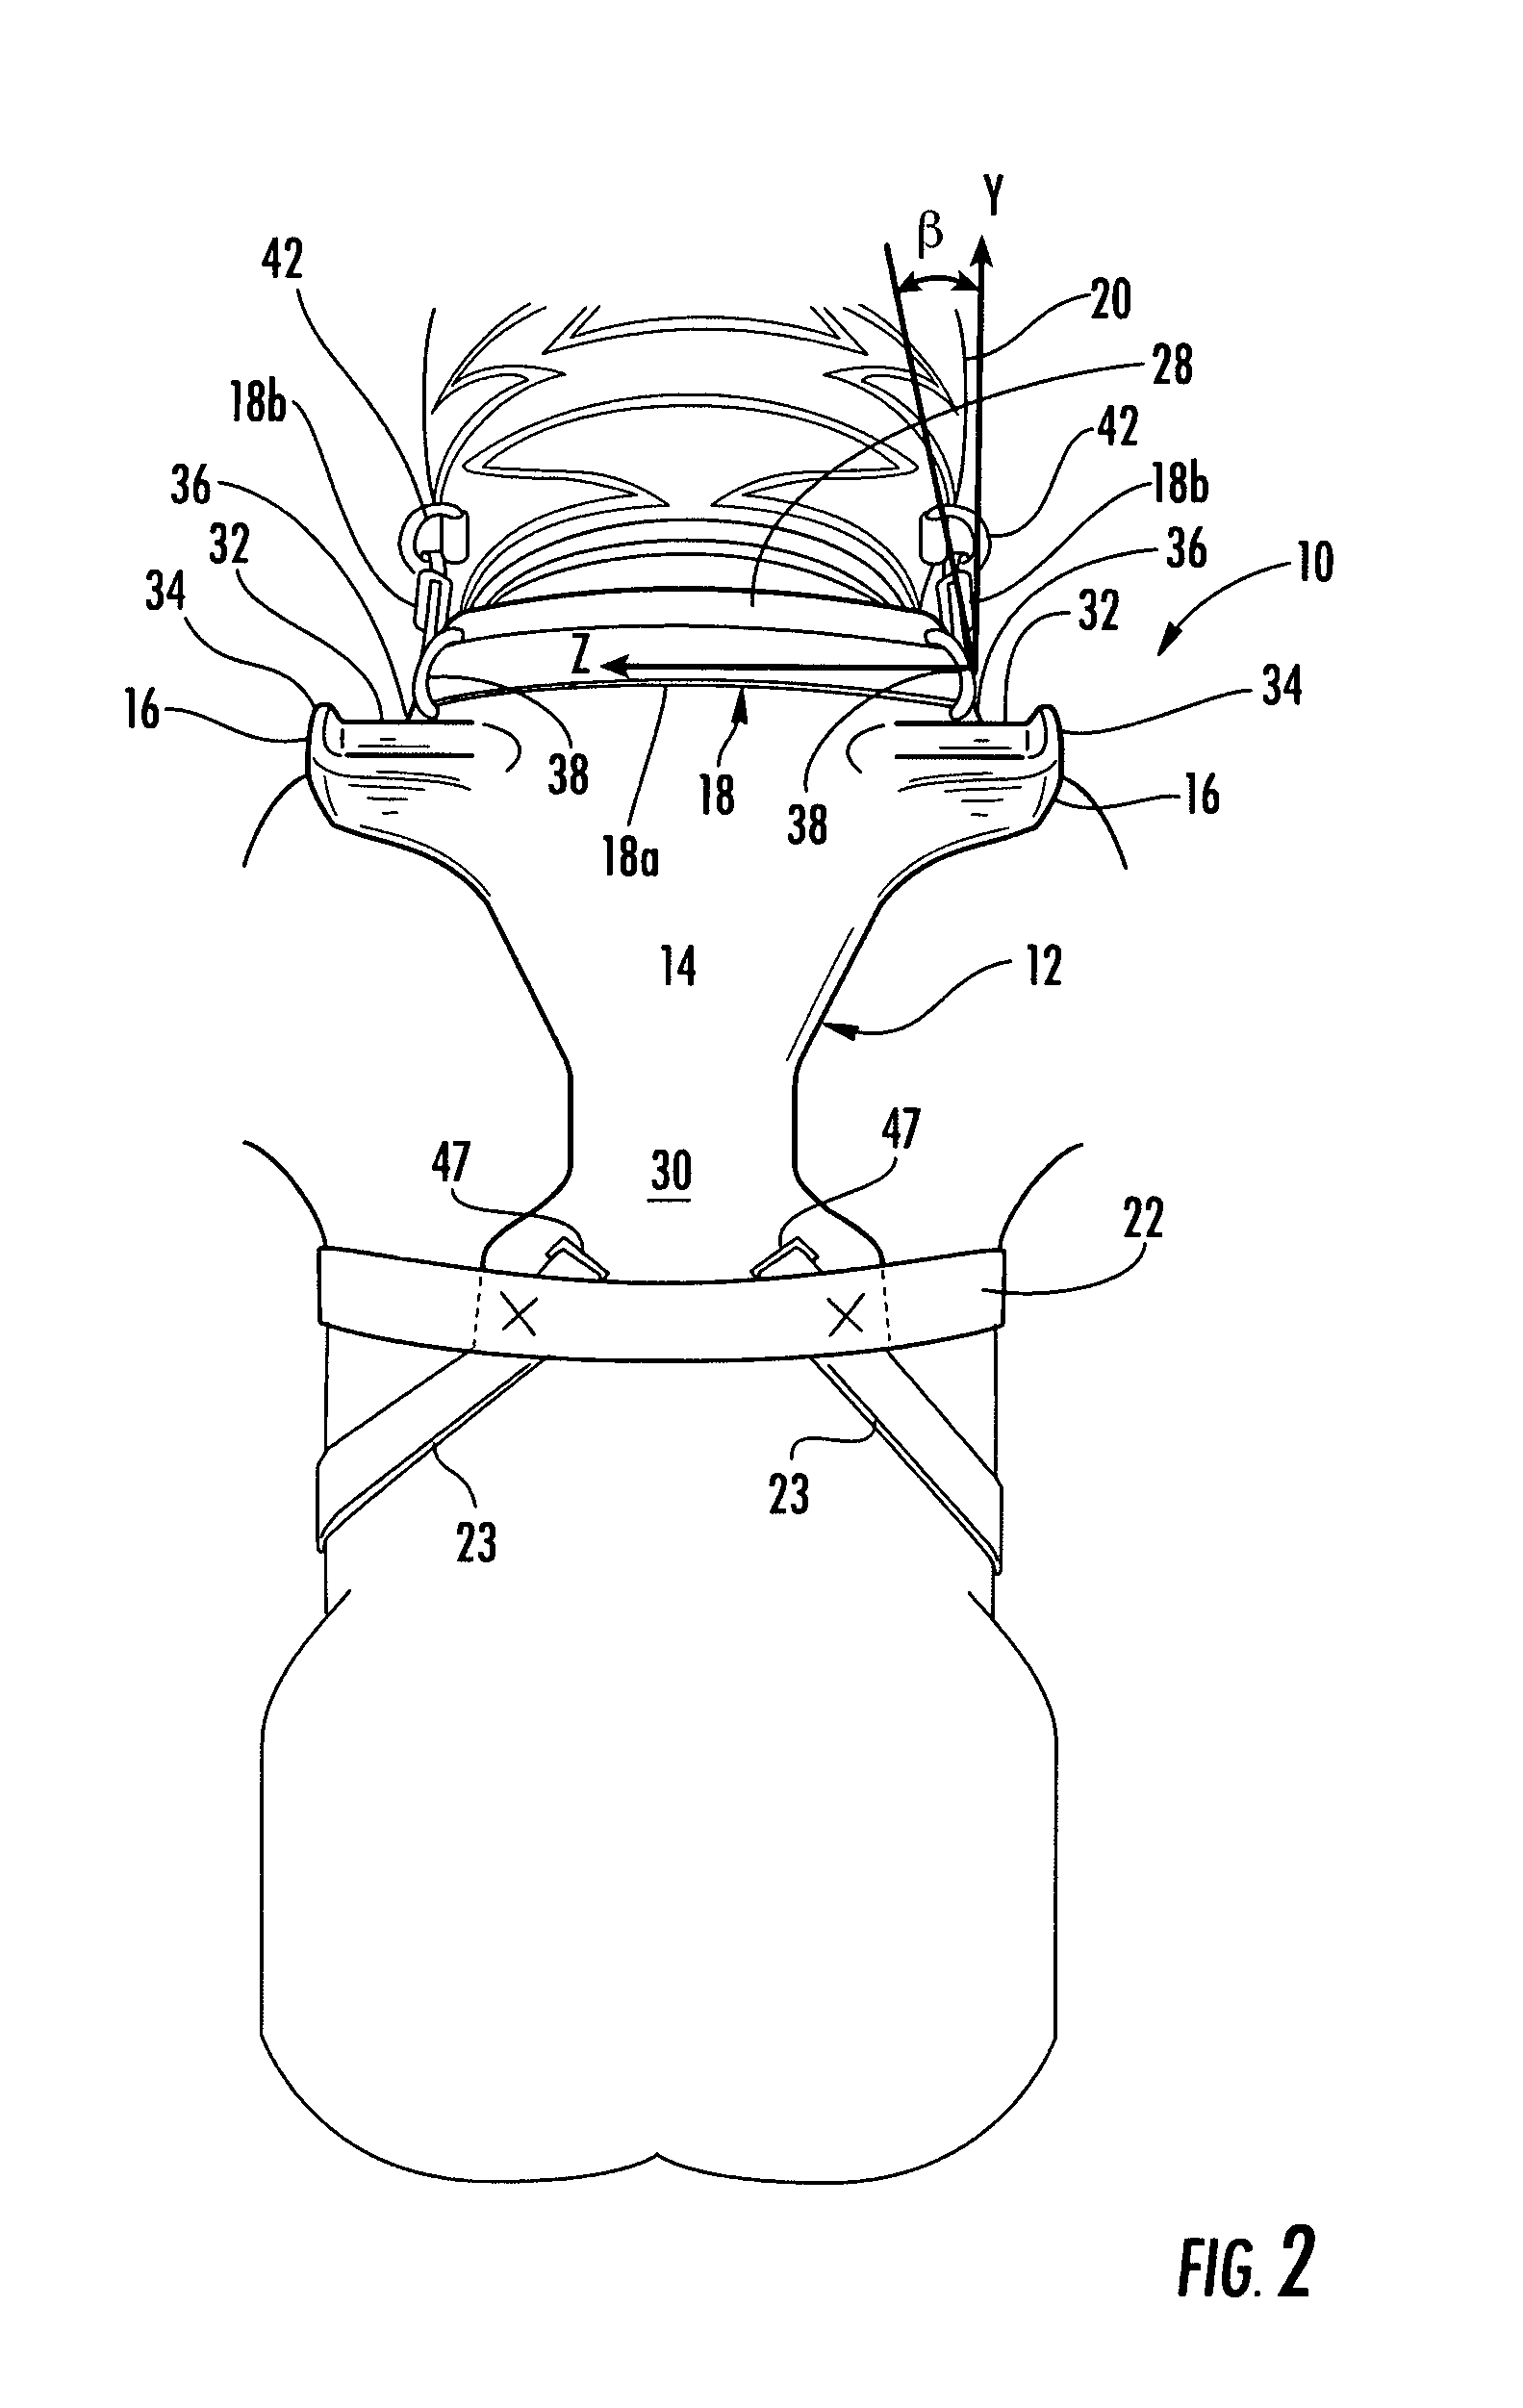 Head restraint device having a support member with back and shoulder portions